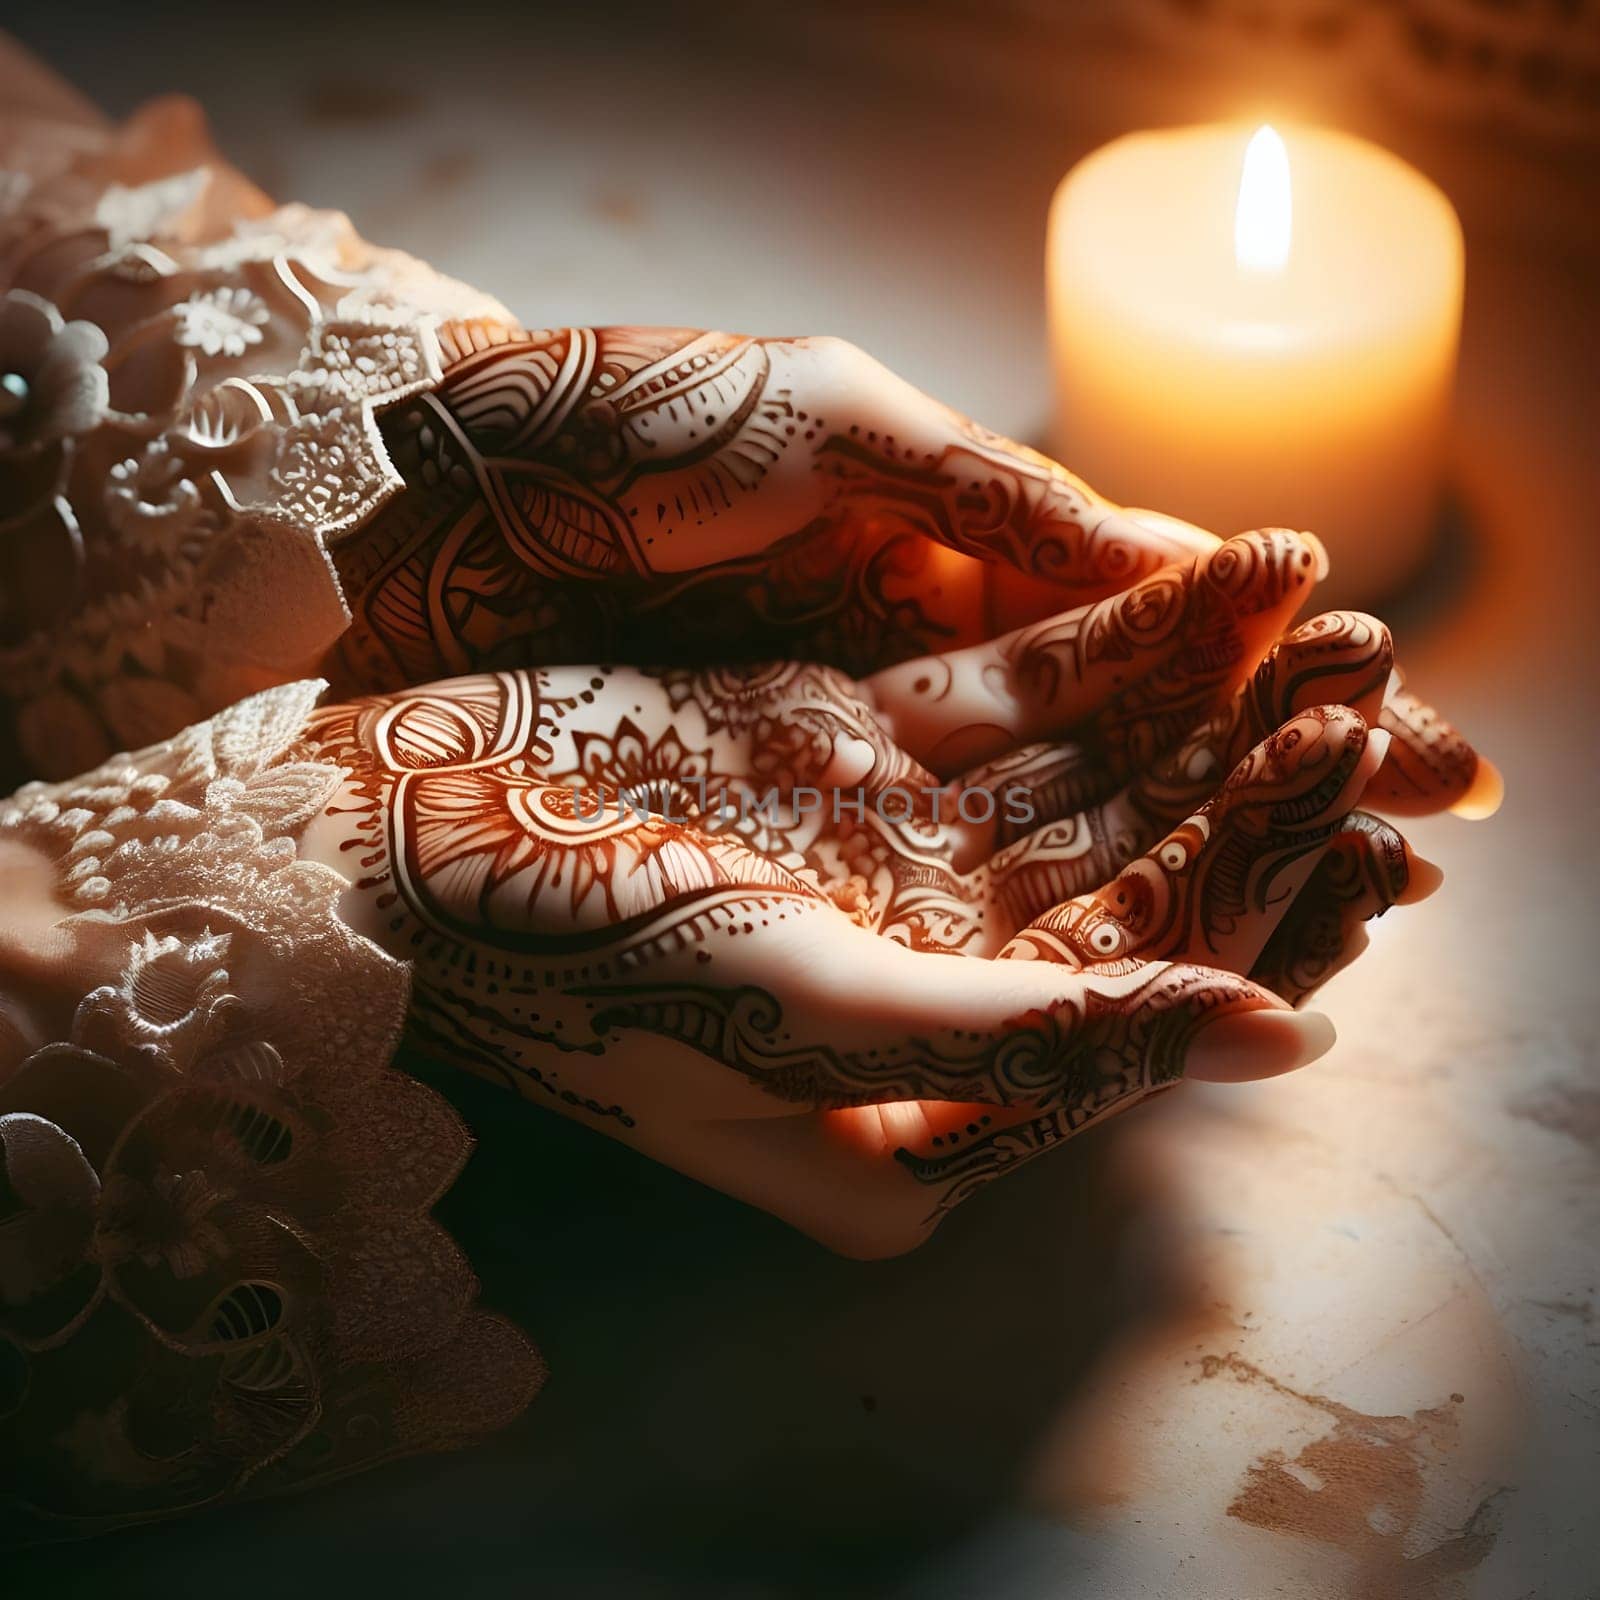 An intricate henna design on hands clasped in prayer, with soft candlelight casting a warm glow 4k, photorealistic. High quality photo